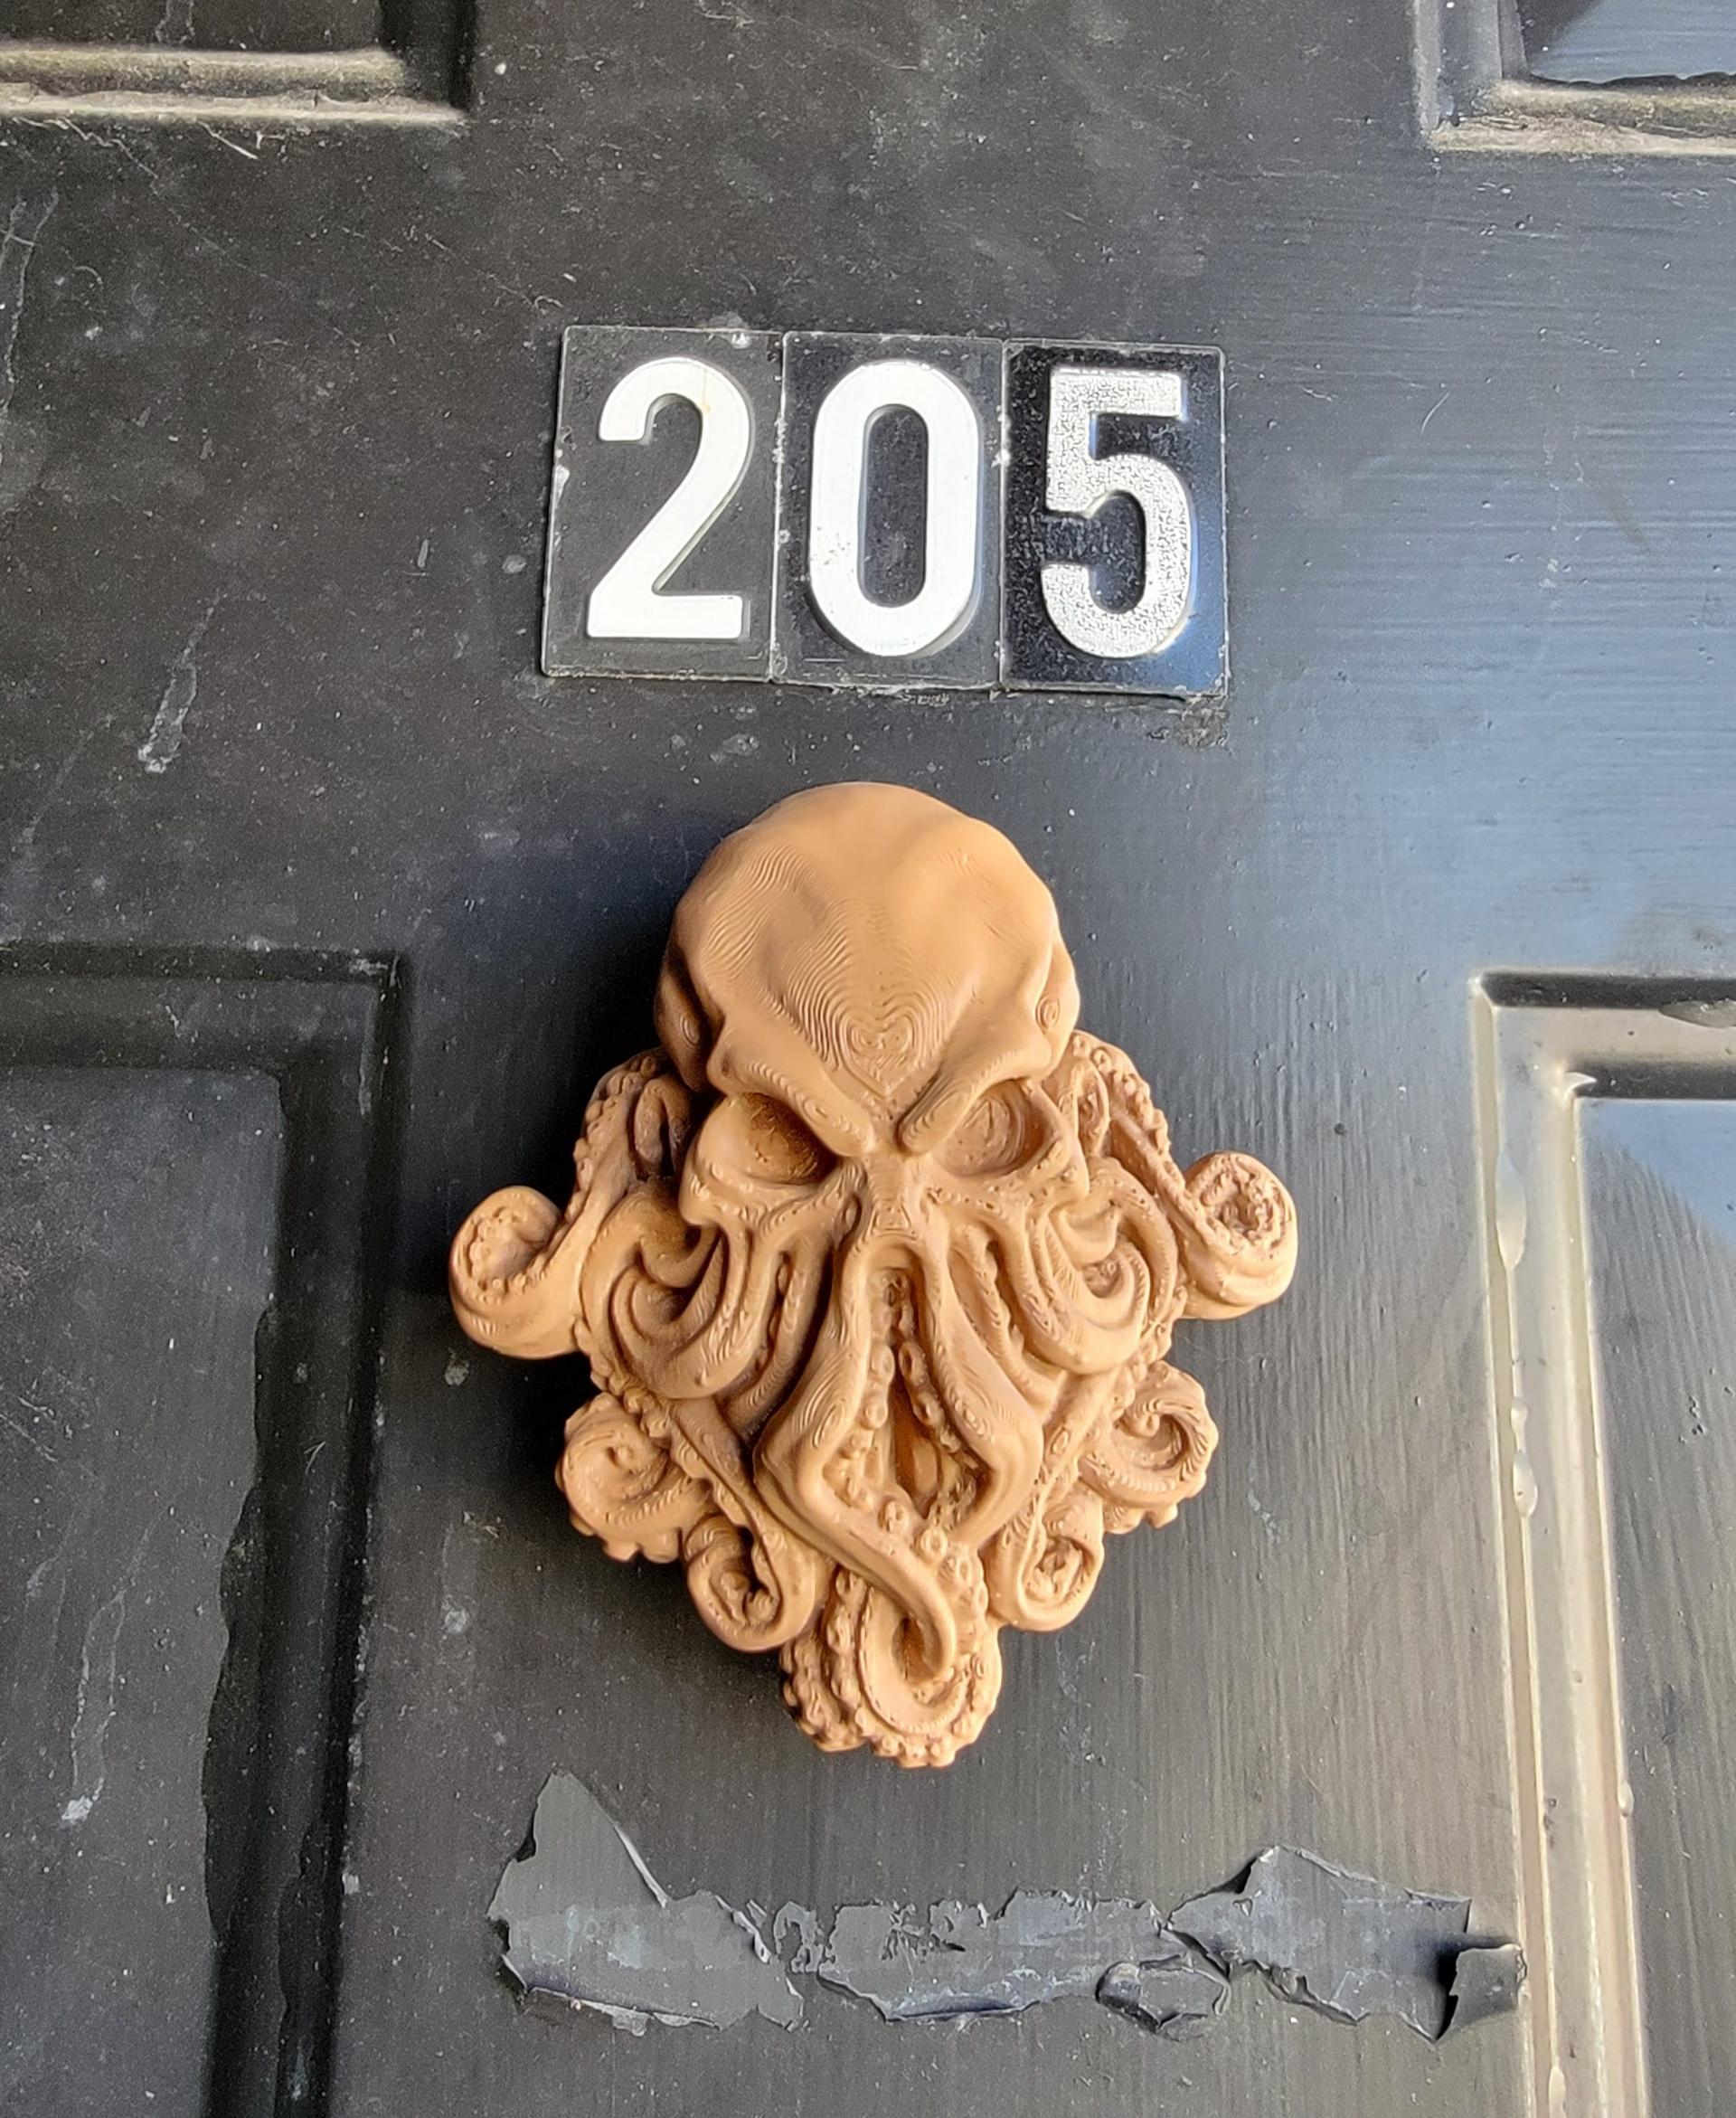 Cthulhu  - Used a magnet and some Velcro tape to make it easily removable. I'm leaving it as a fridge magnet. This would probably be stolen off my front door, which apparently has metal through it. - 3d model